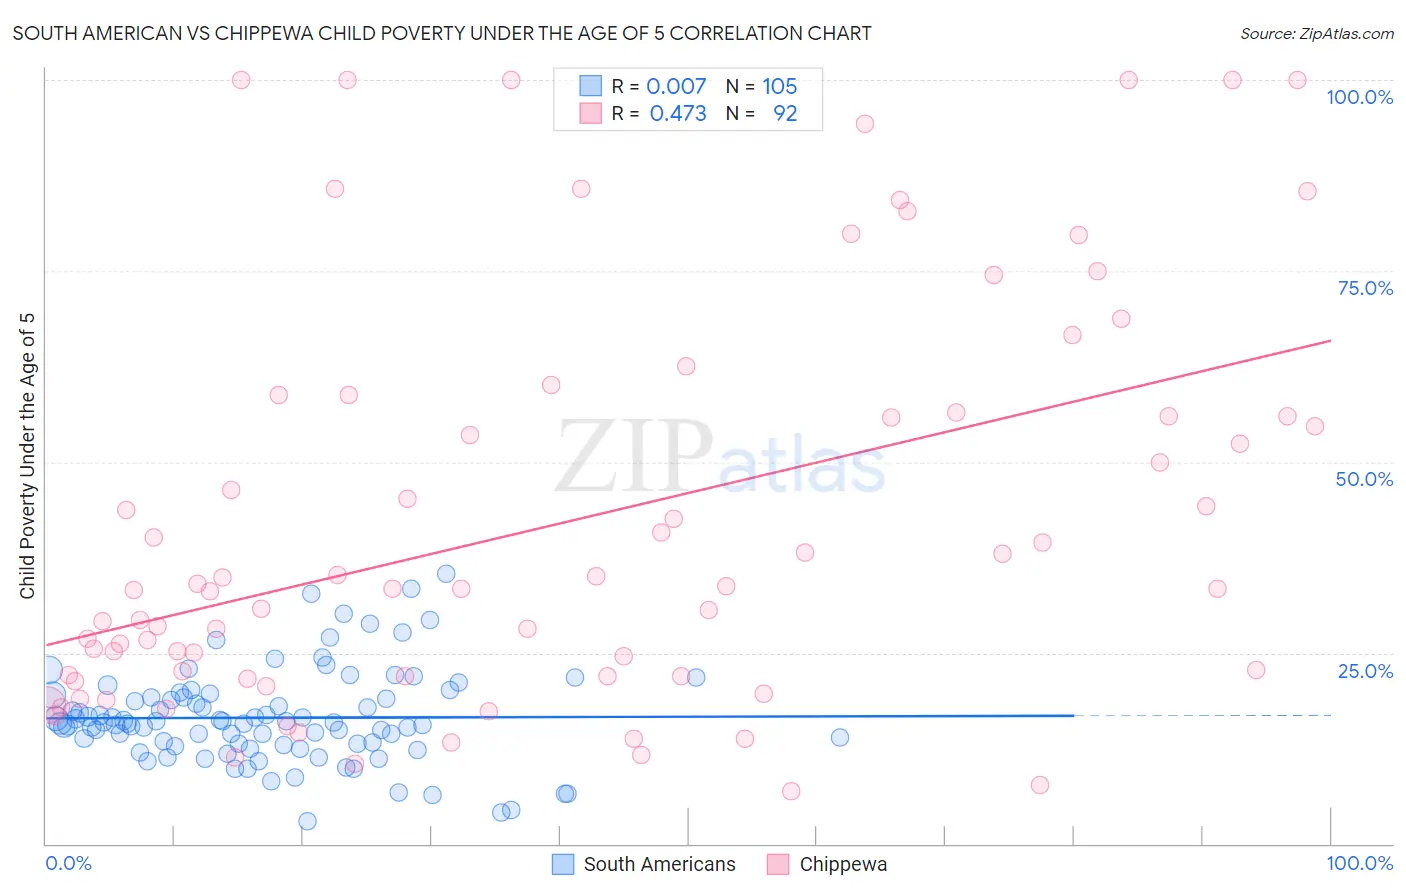 South American vs Chippewa Child Poverty Under the Age of 5